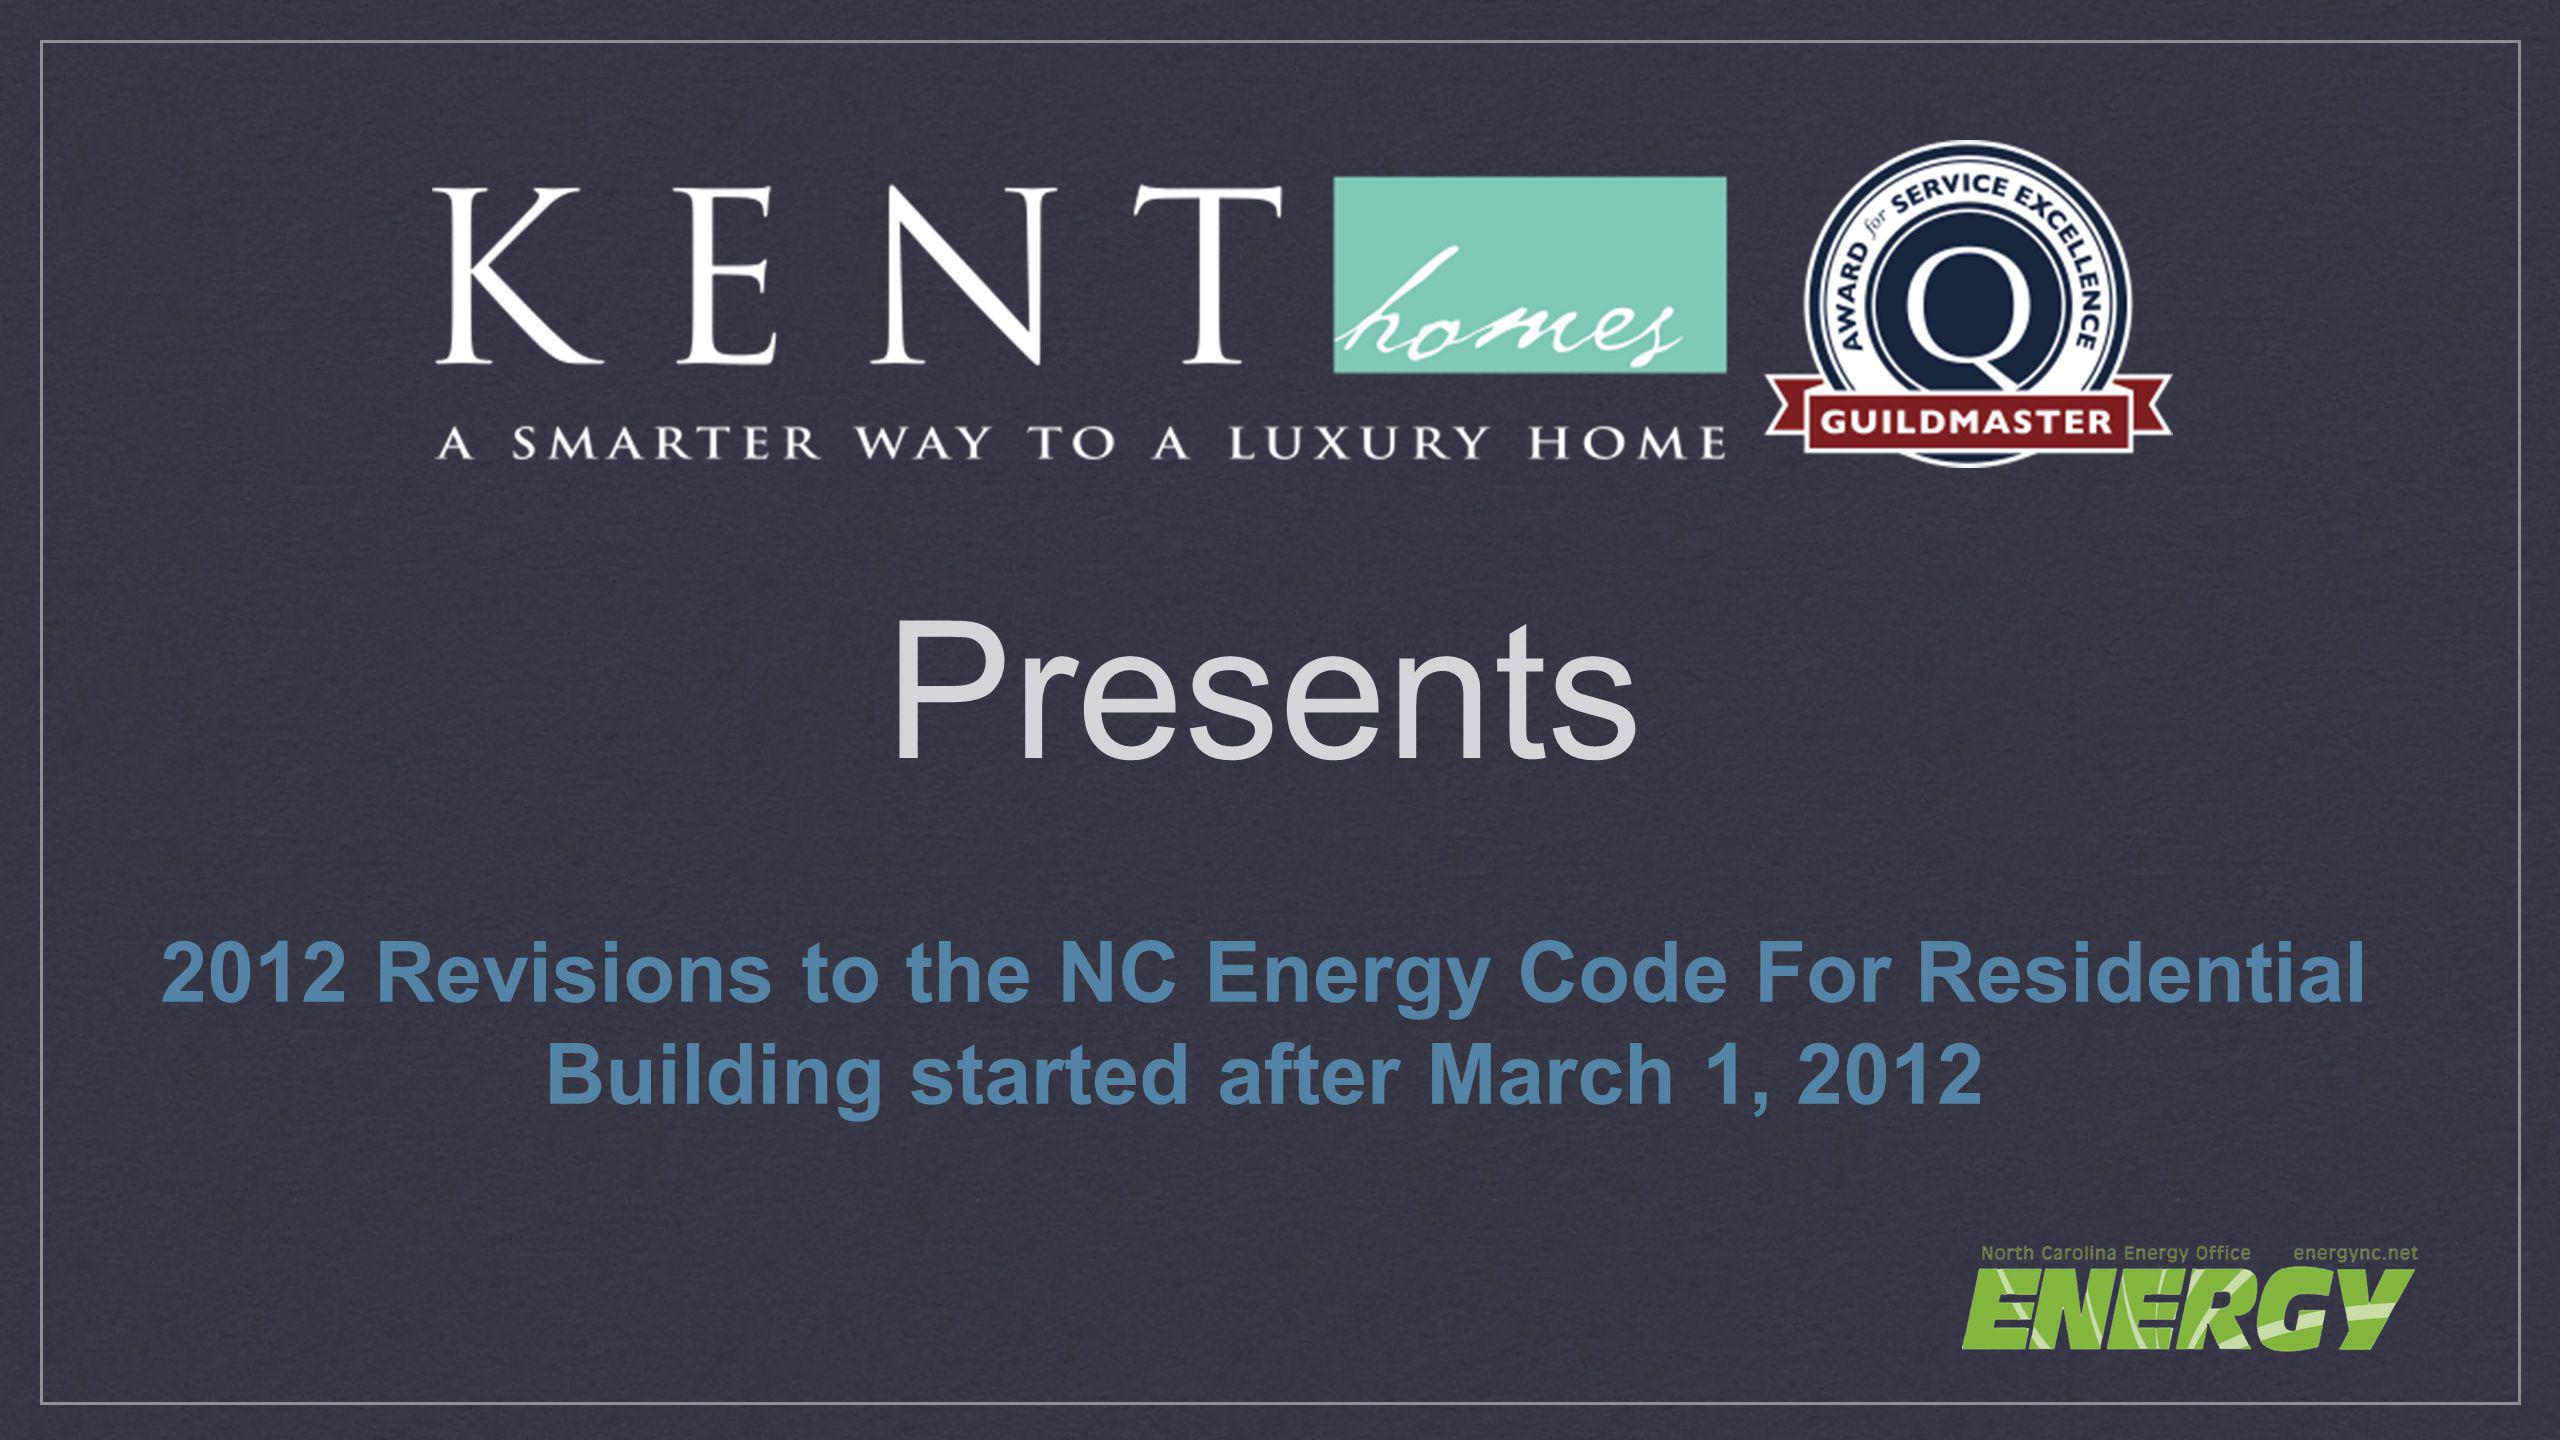 Presents 2012 Revisions to the NC Energy Code For Residential Building started after March 1, 2012